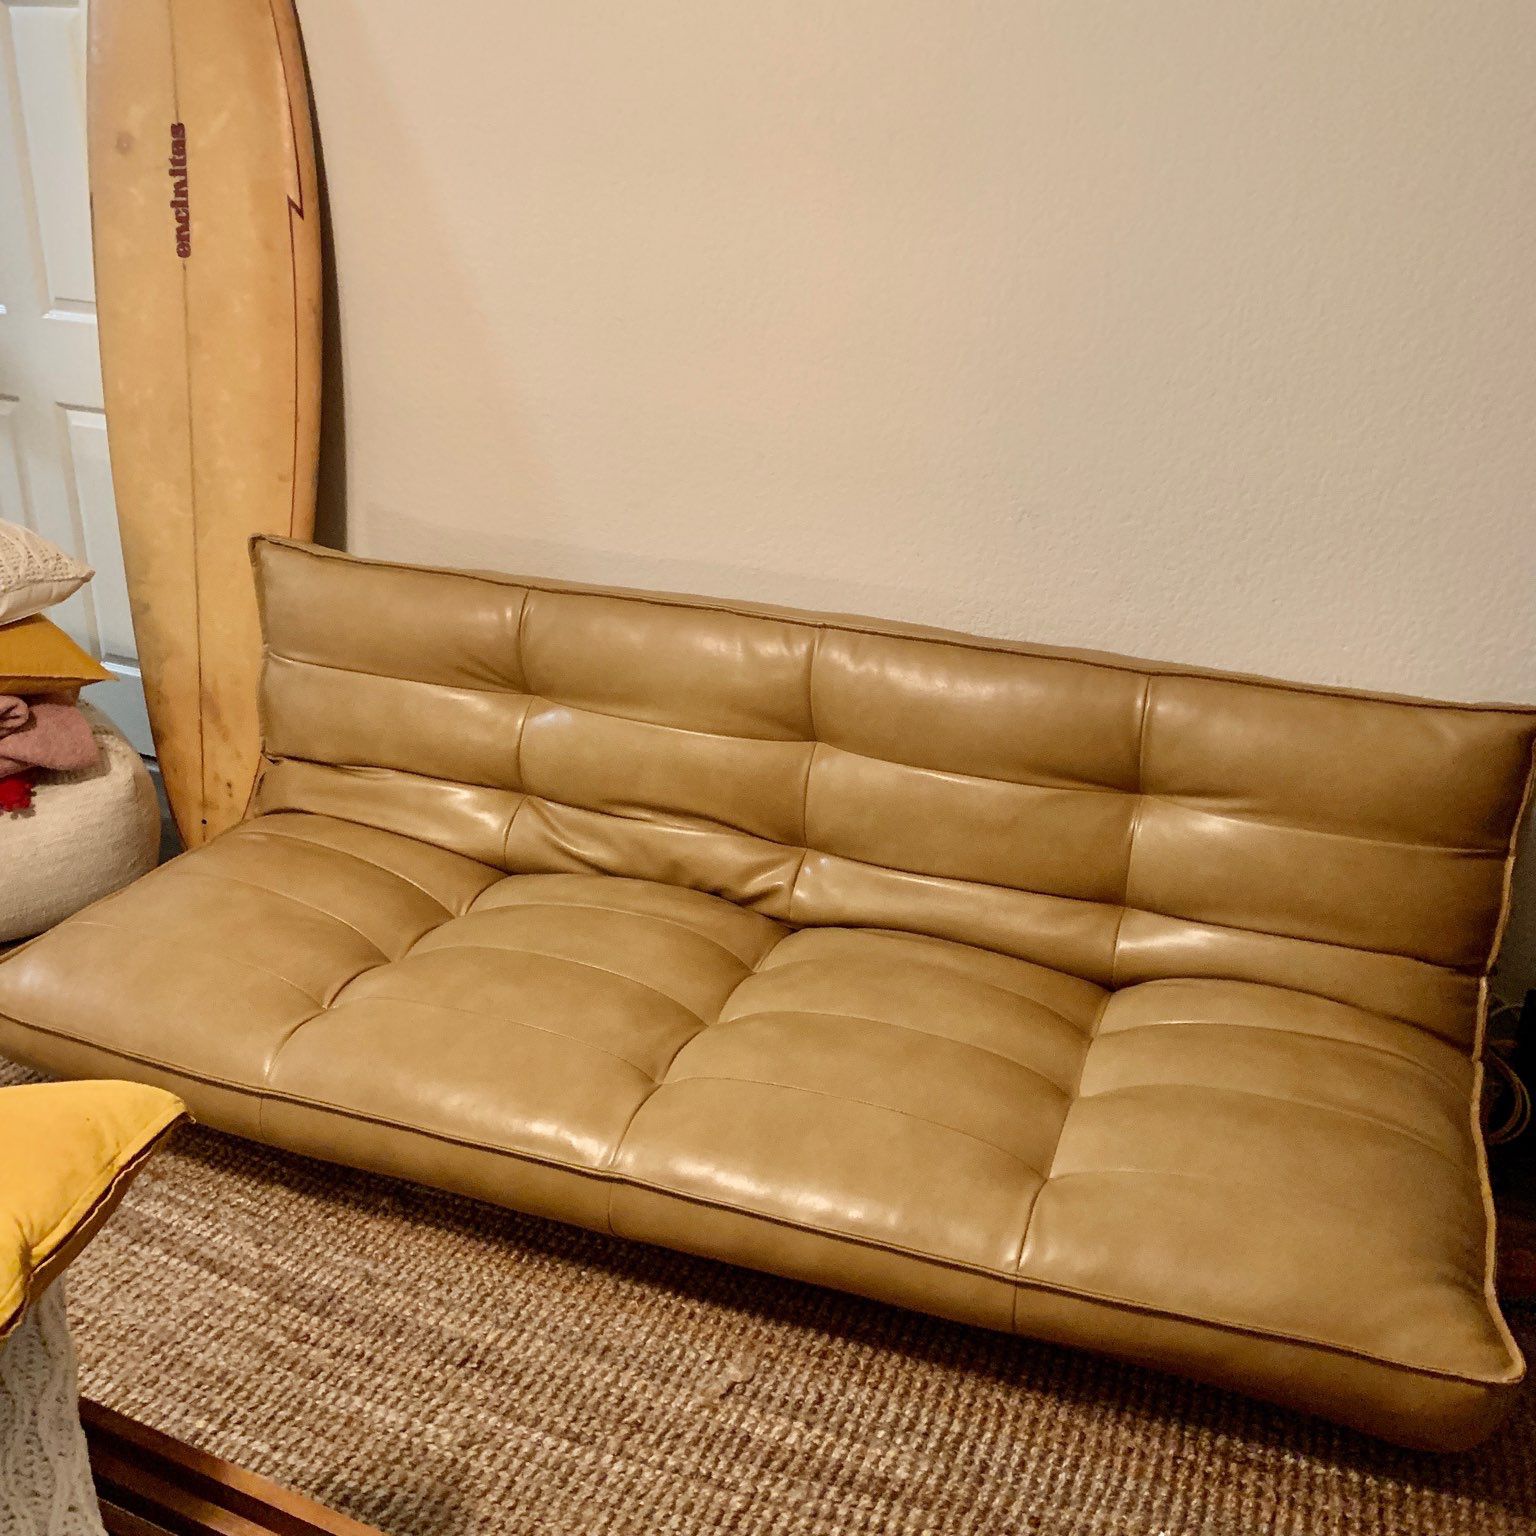 Genuine Recycled Leather “Greta” Urban Outfitters Sleeper Couch